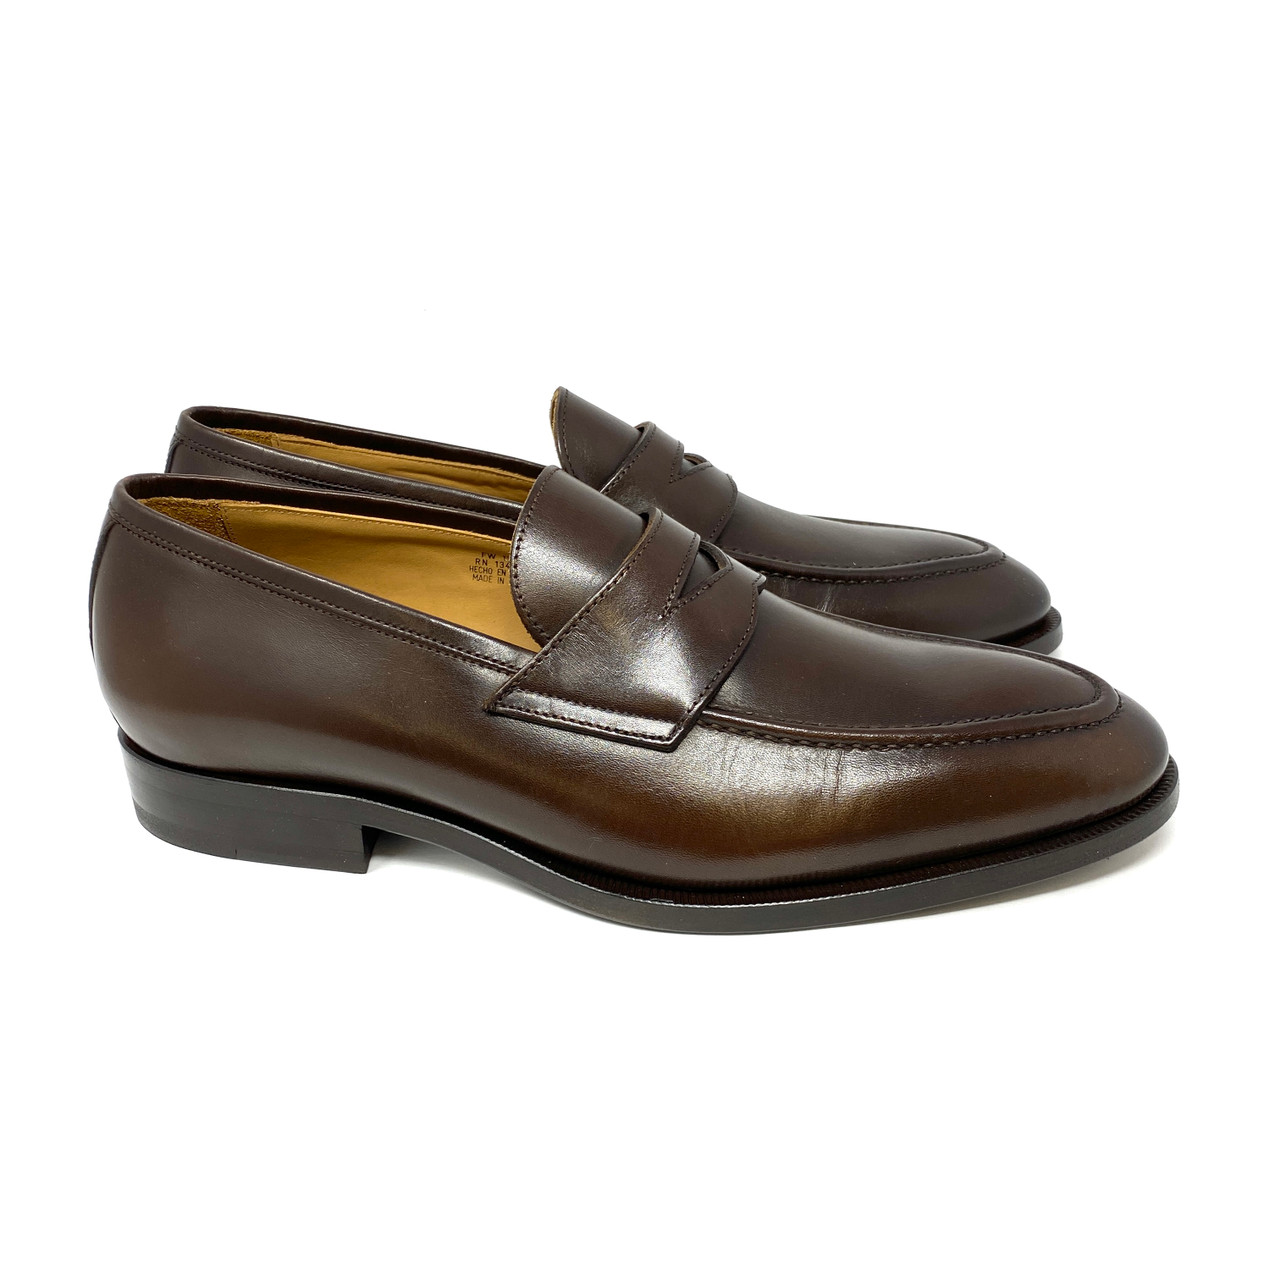 SuitSupply Smooth Brown Leather Penny Loafer